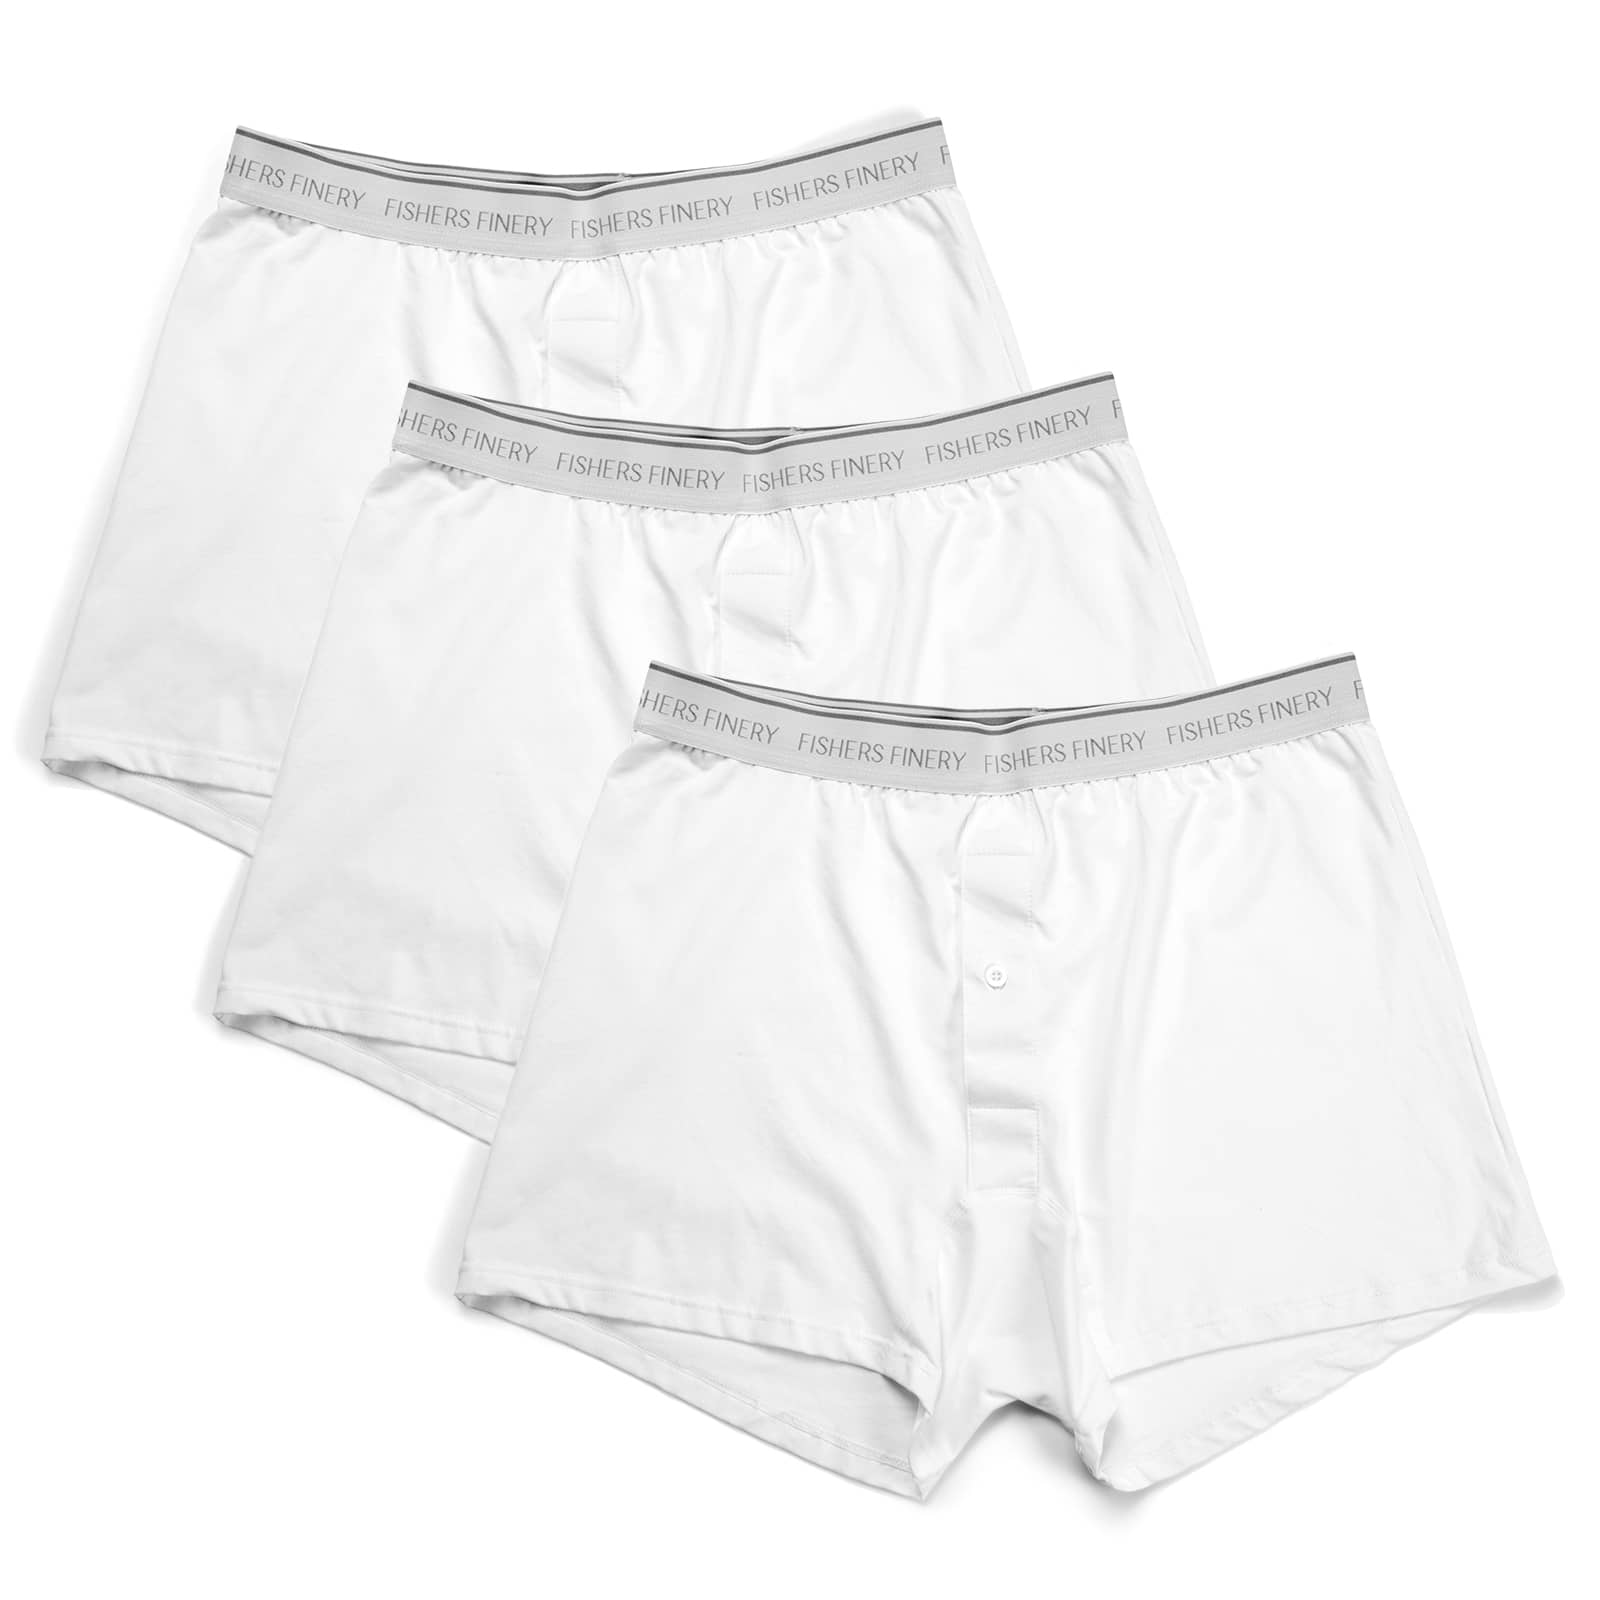 Men's Relaxed Fit Soft Knit Boxer - Multi Pack Options Mens>Underwear Fishers Finery White Small 3 Pack